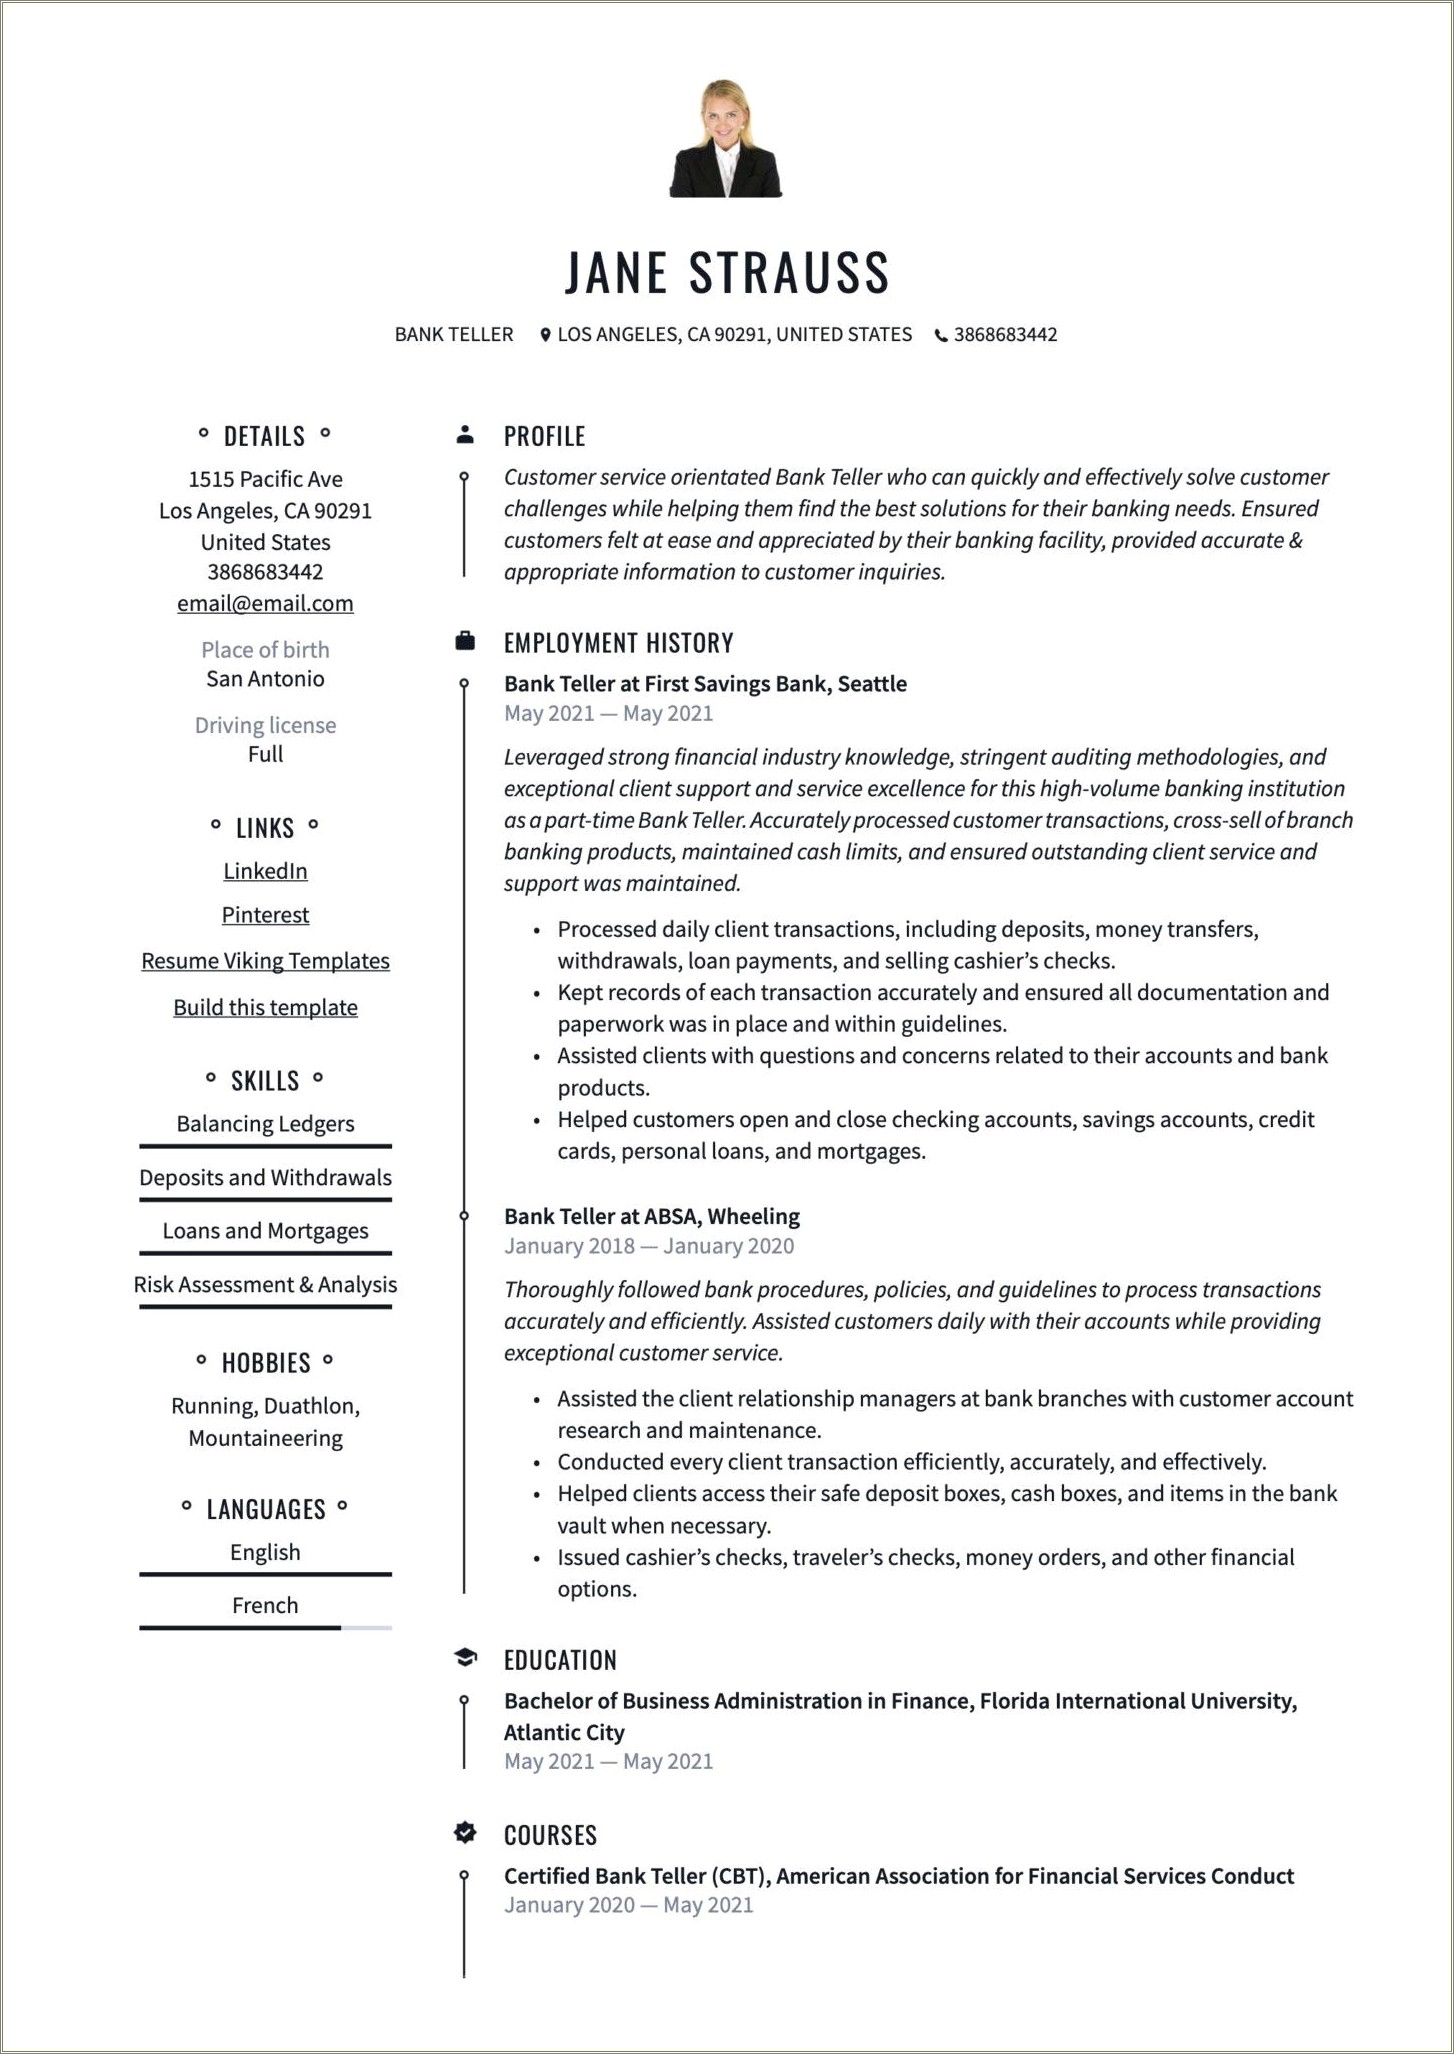 Resume Objective Examples For A Bank Teller